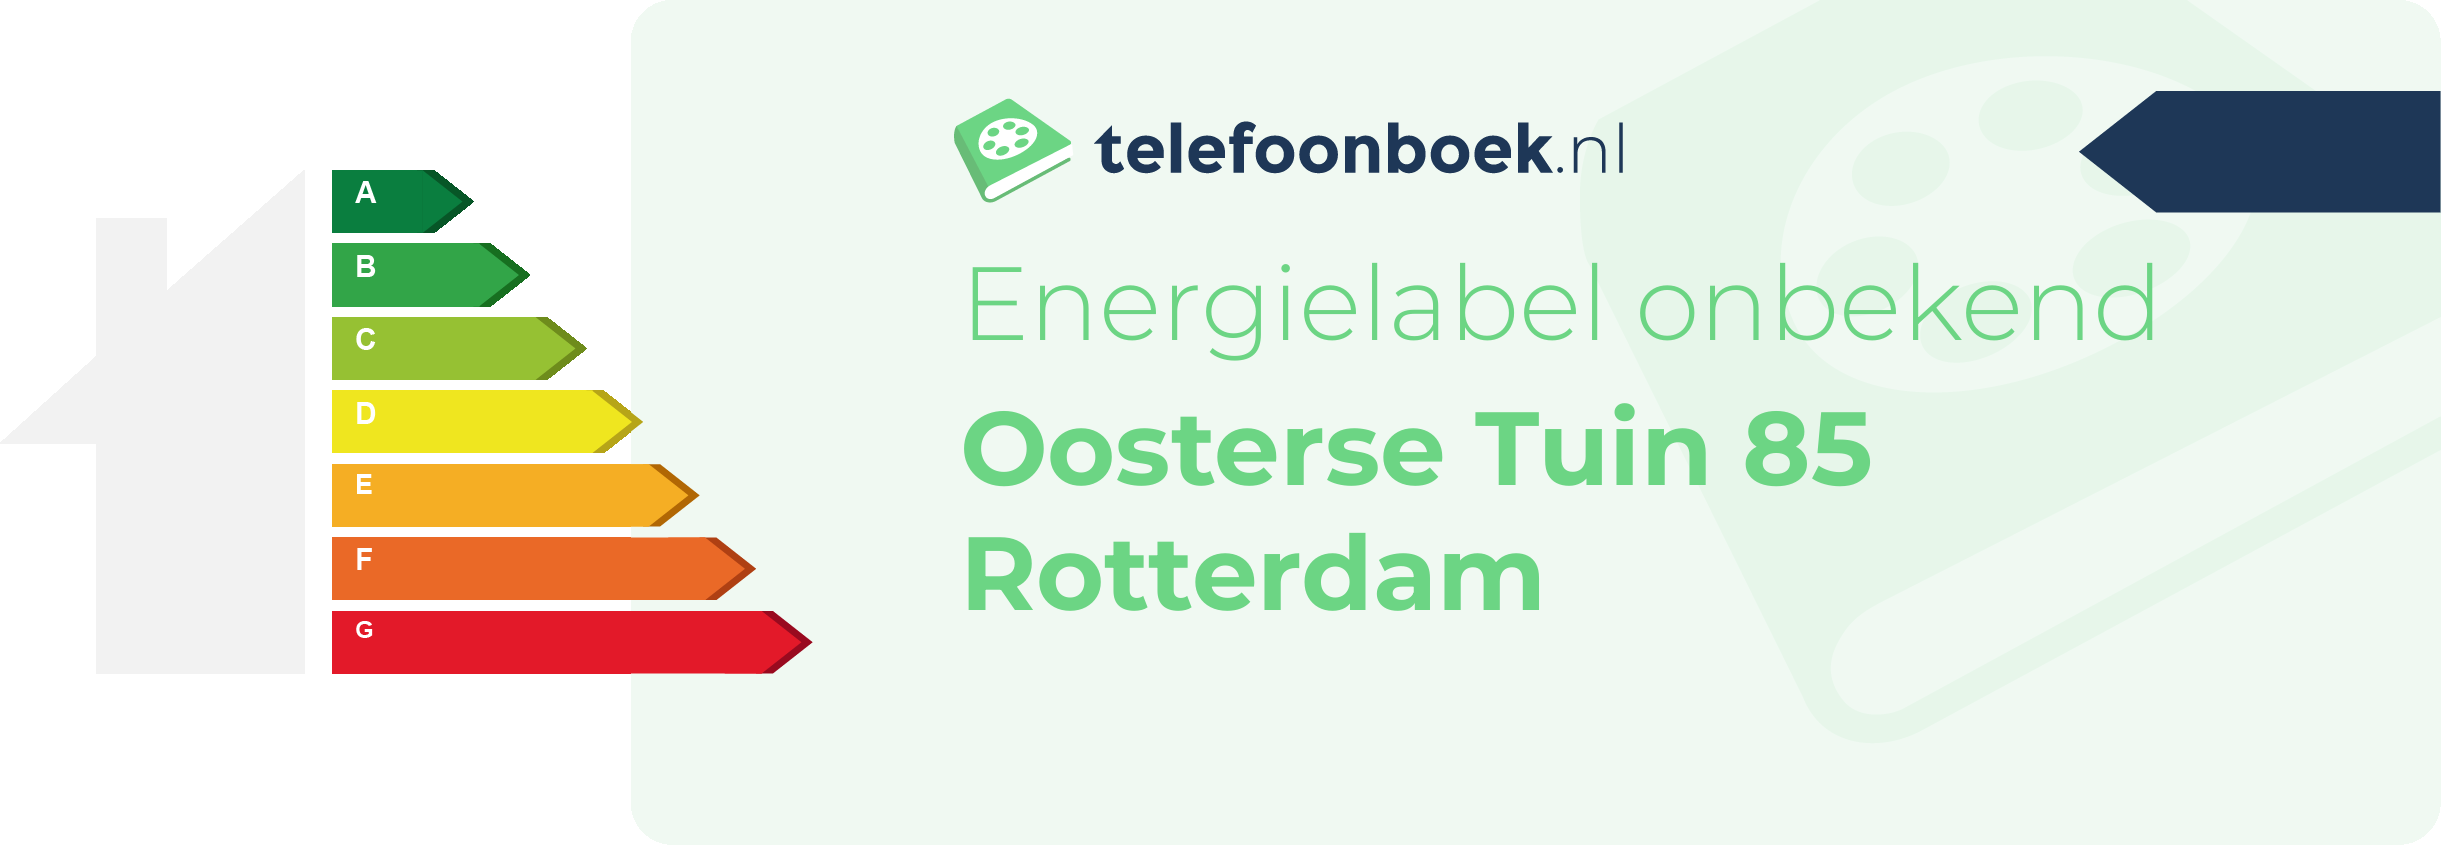 Energielabel Oosterse Tuin 85 Rotterdam